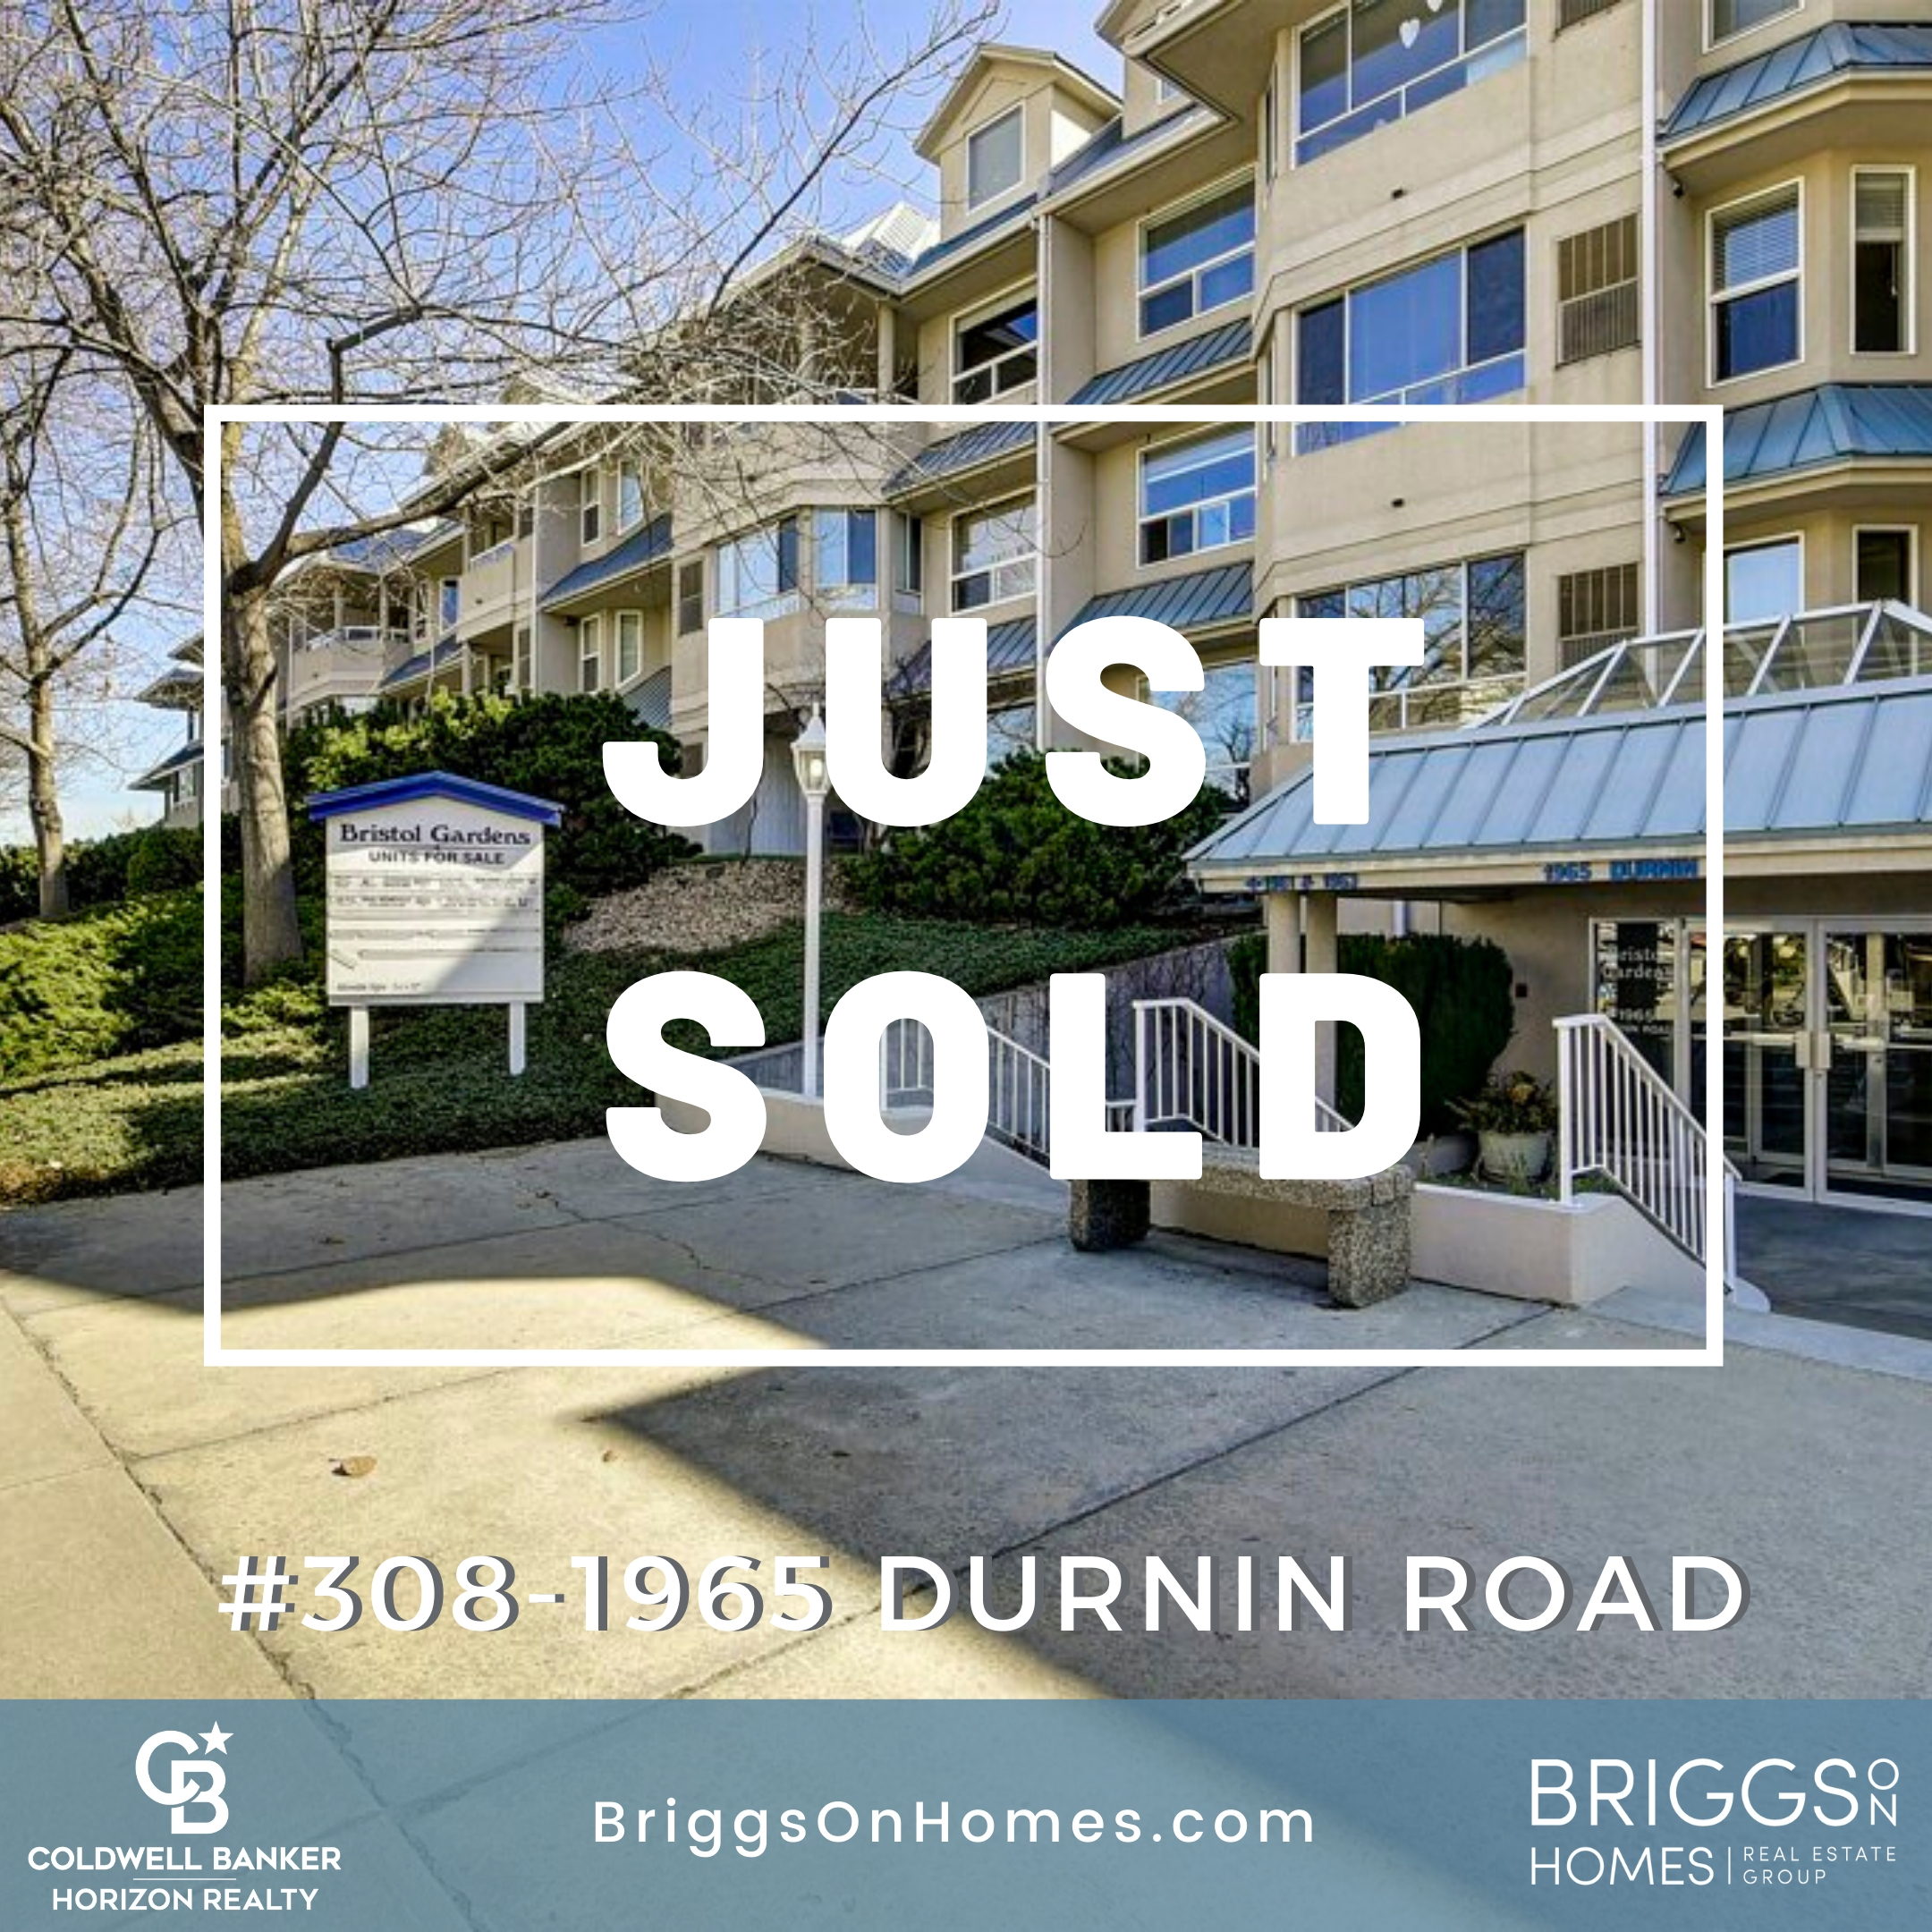 Just SOLD Durnin Road